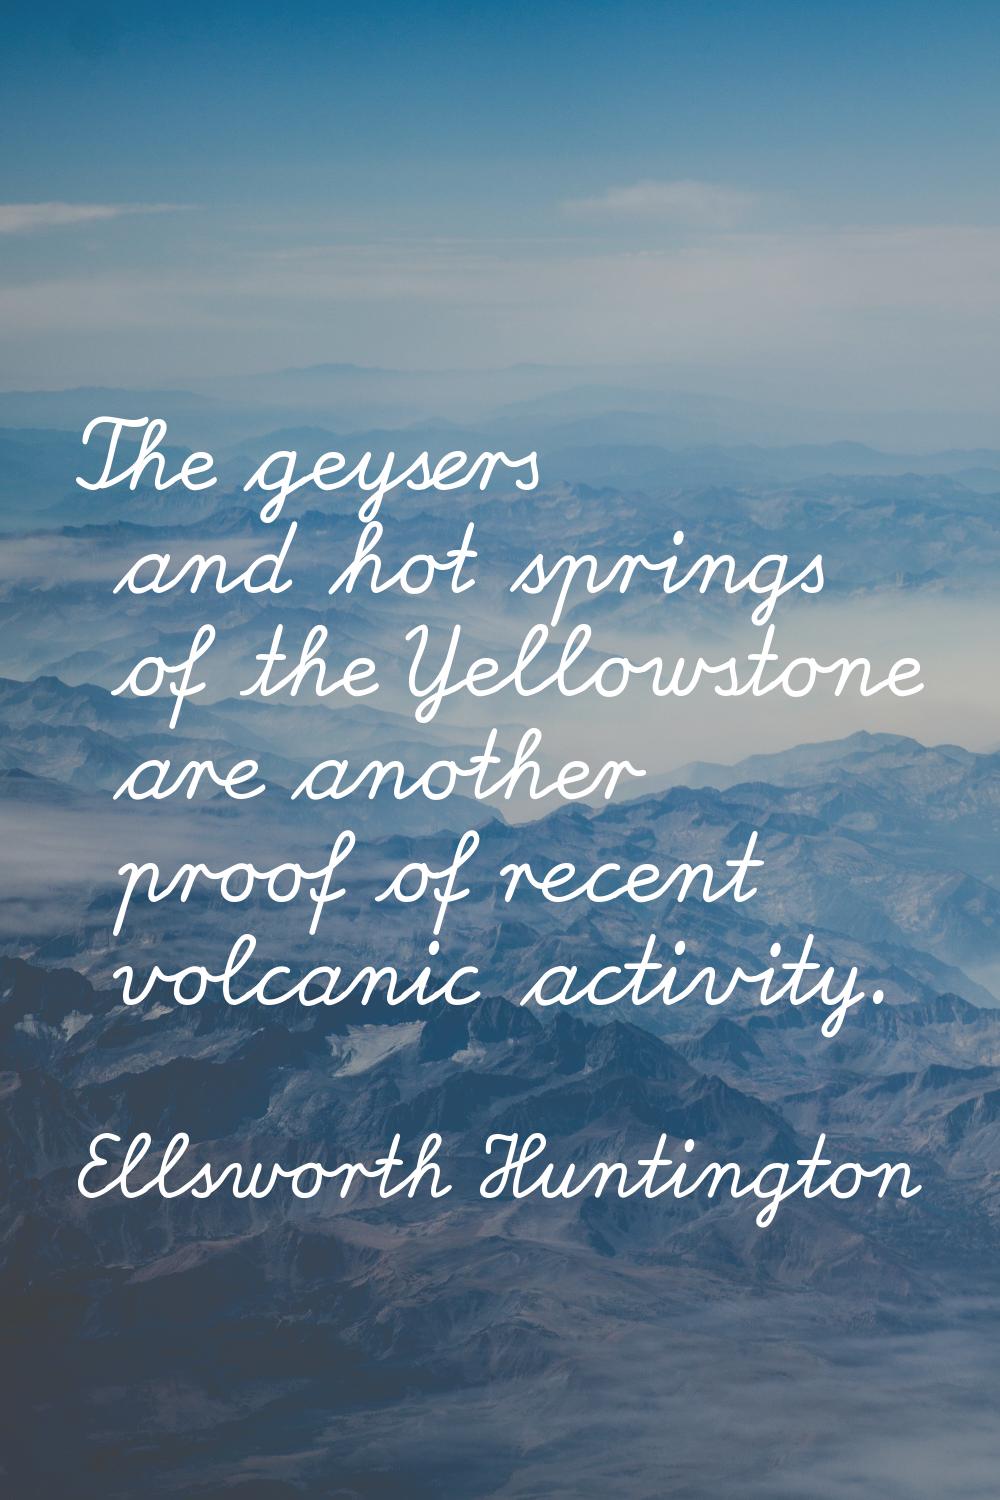 The geysers and hot springs of the Yellowstone are another proof of recent volcanic activity.